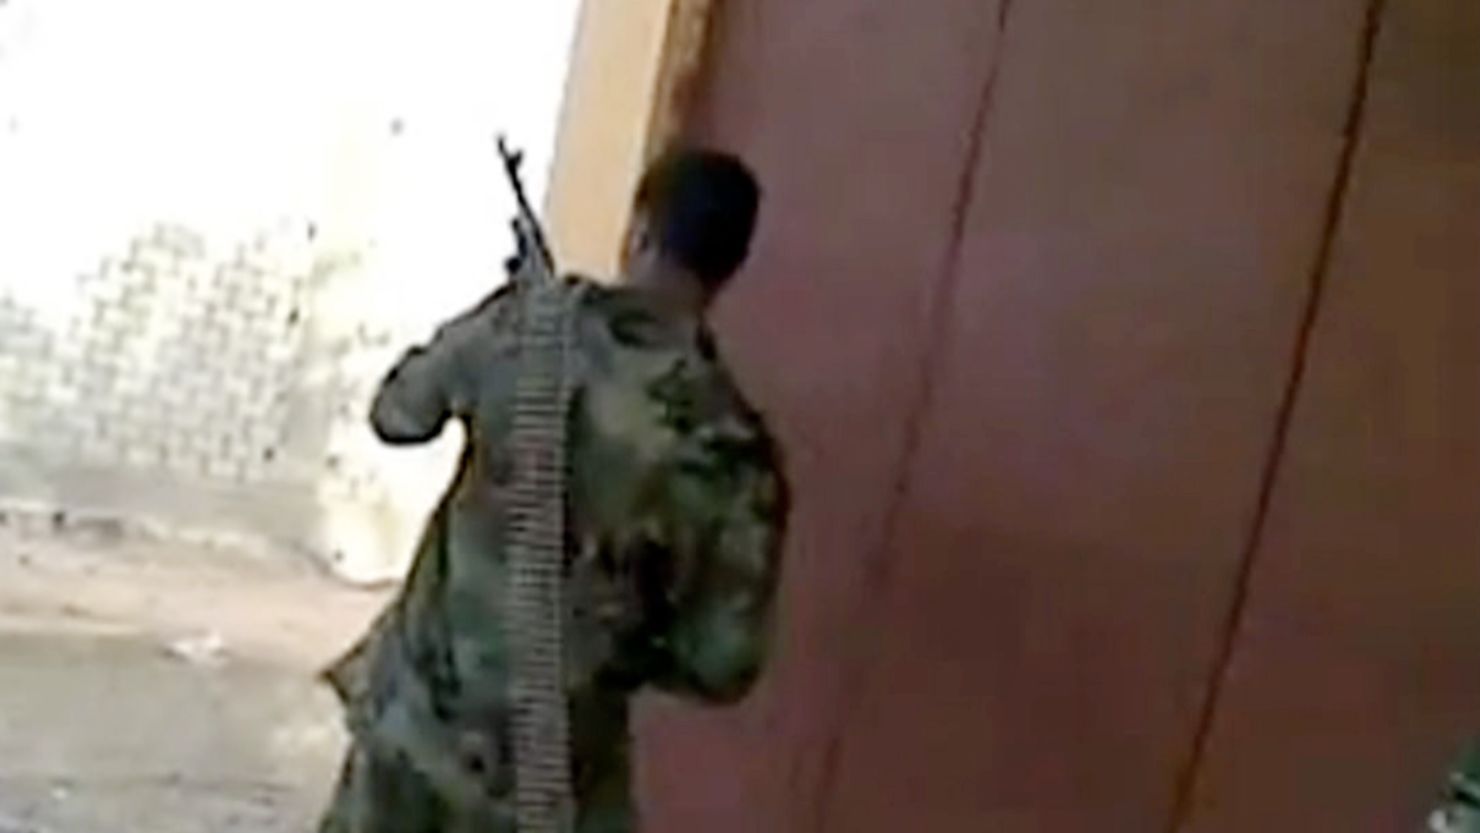 A YouTube video purported to be from Sabha, Libya, shows men shooting from behind a corner.